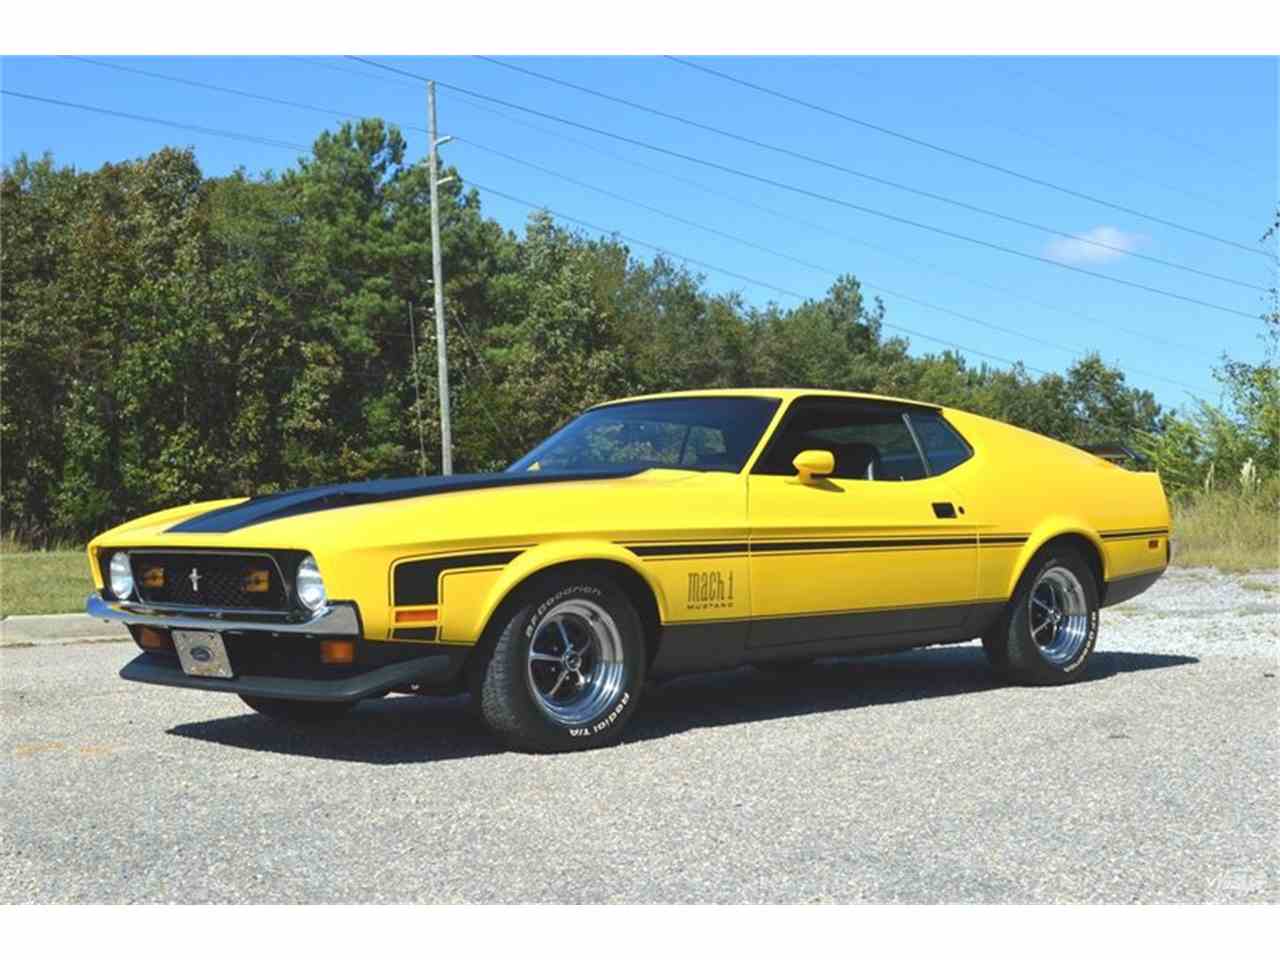 1972 Ford Mustang Mach 1 for Sale | ClassicCars.com | CC-1030090